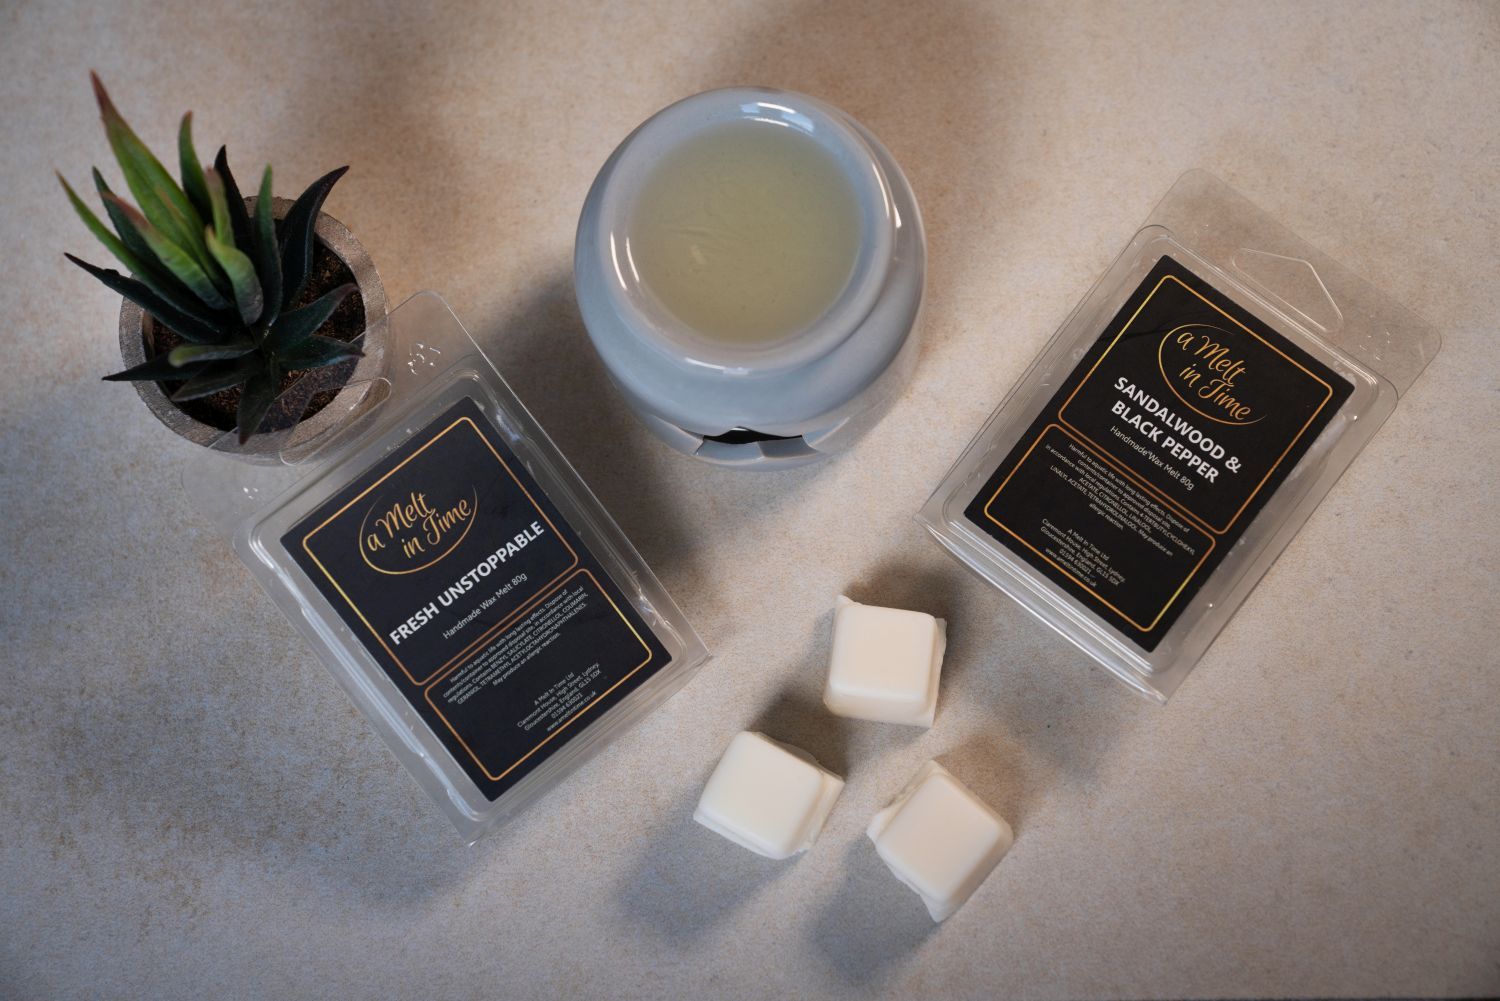 Fresh Unstoppable Highly Scented Wax Melts